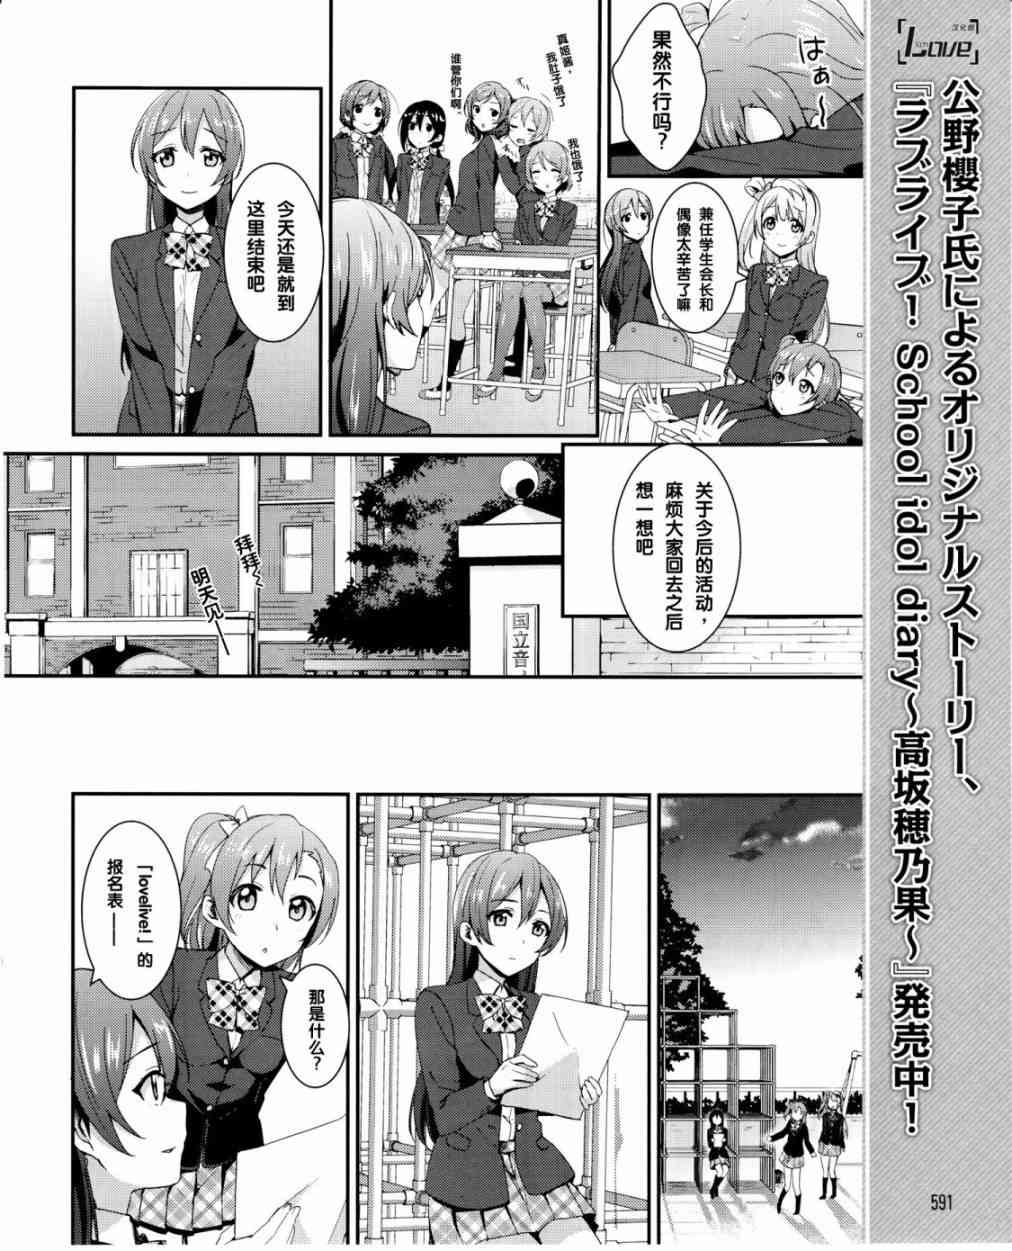 LoveLive - 16話 - 3